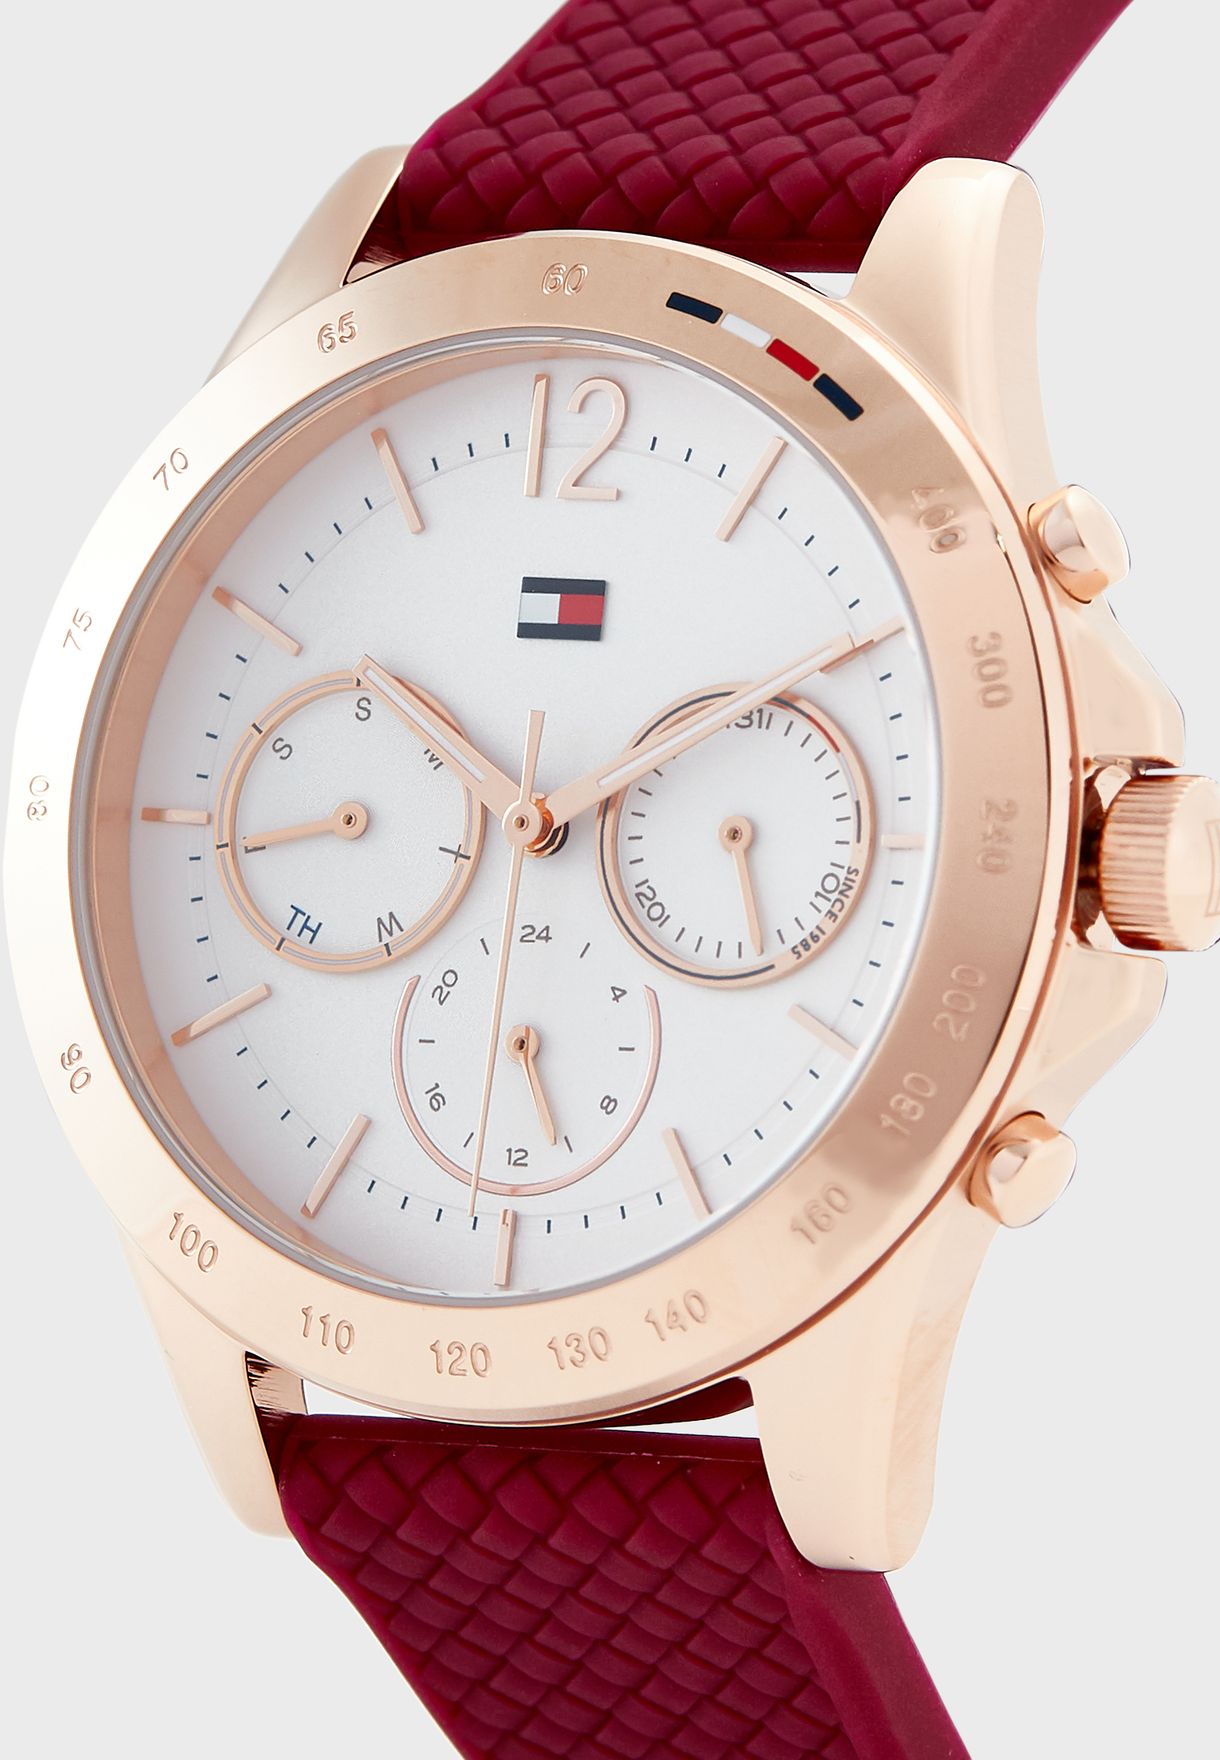 ĐỒNG HỒ NỮ TOMMY HILFIGER ROSE GOLD SPORT WATCH WITH RED SILICONE STRAP HAVEN ANALOG WATCH FOR WOMEN TH1782200W 9